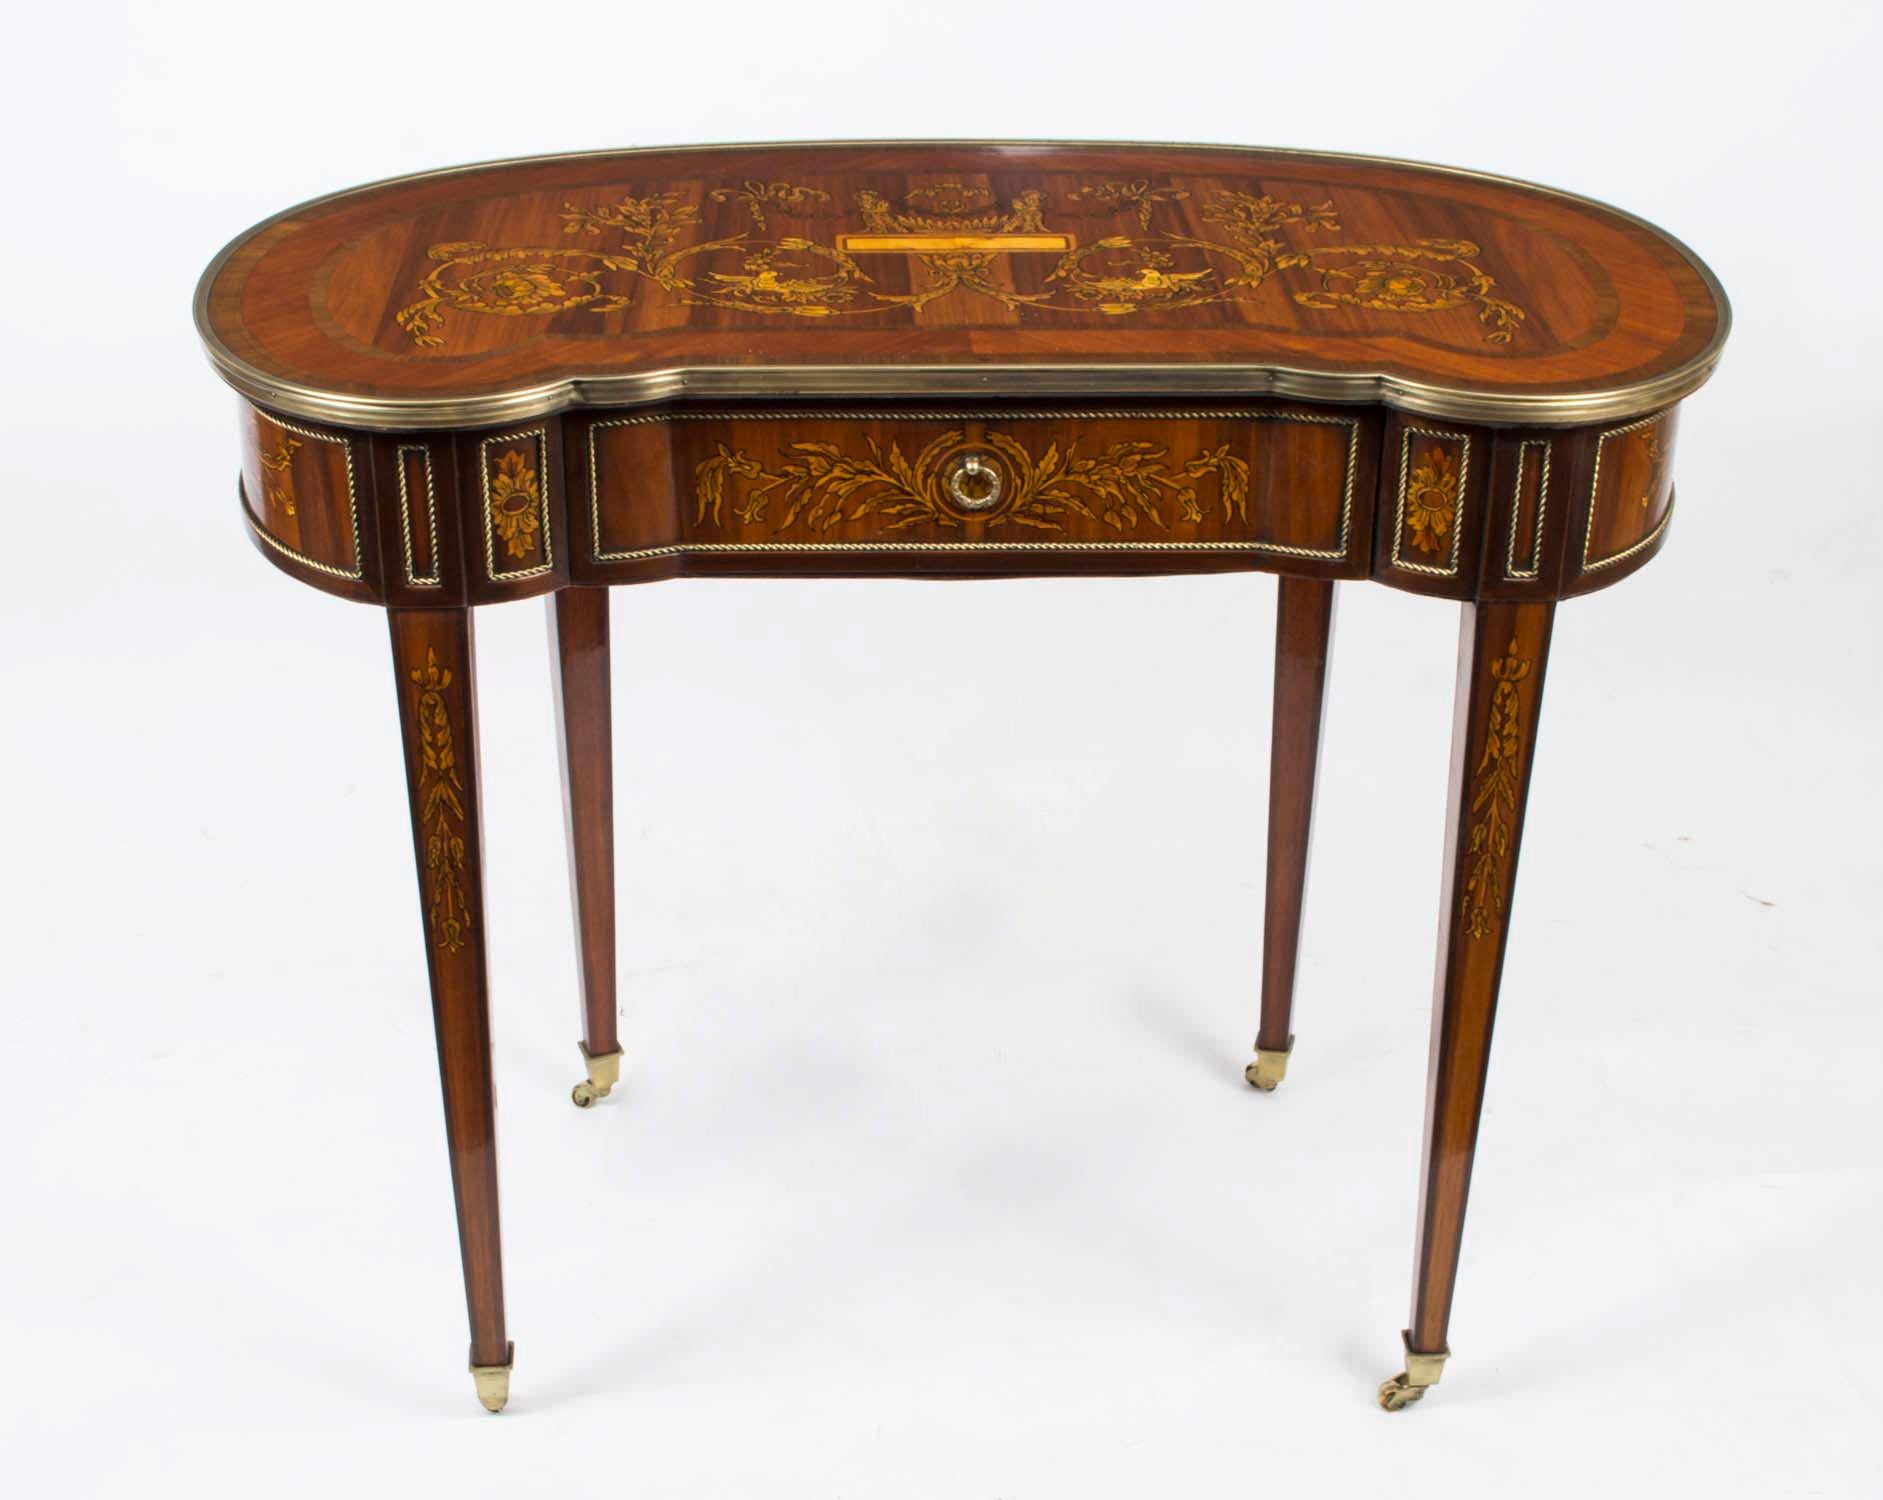 If you are looking for an attractive period style desk but have limited space then this could be the one for you. We are offering this compact French Louis Revival writing table, fitted with decorative ormolu mounts and dating from the last quarter